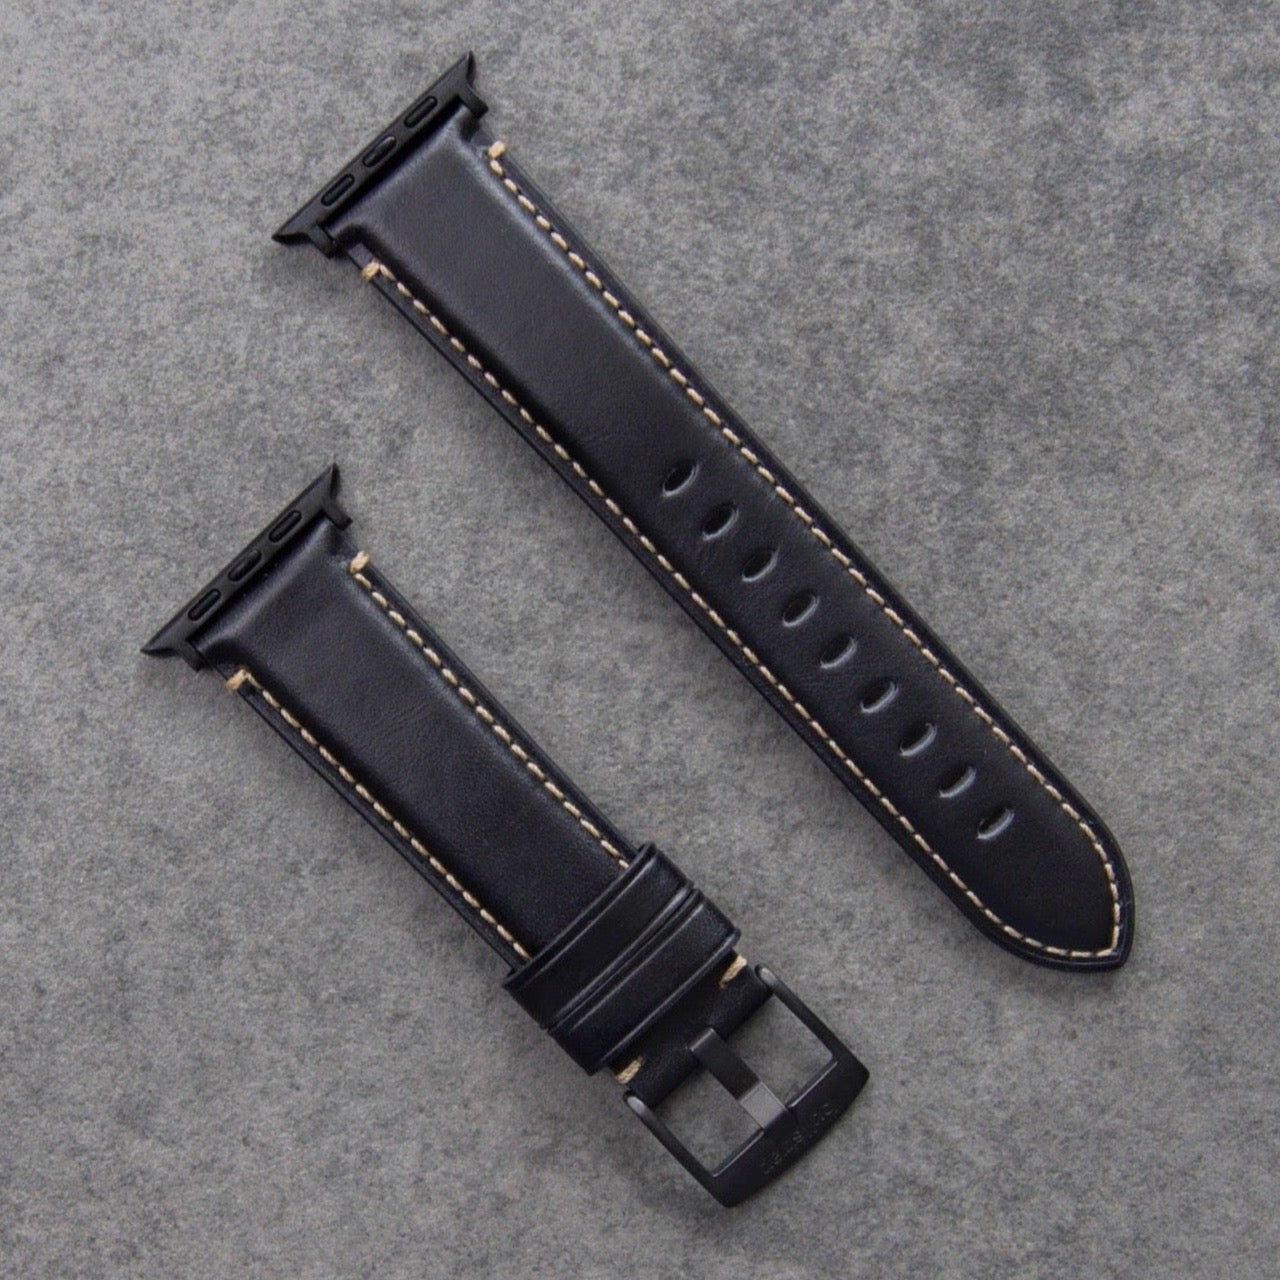 Leather Apple Watch Strap - Black Edition by Bullstrap